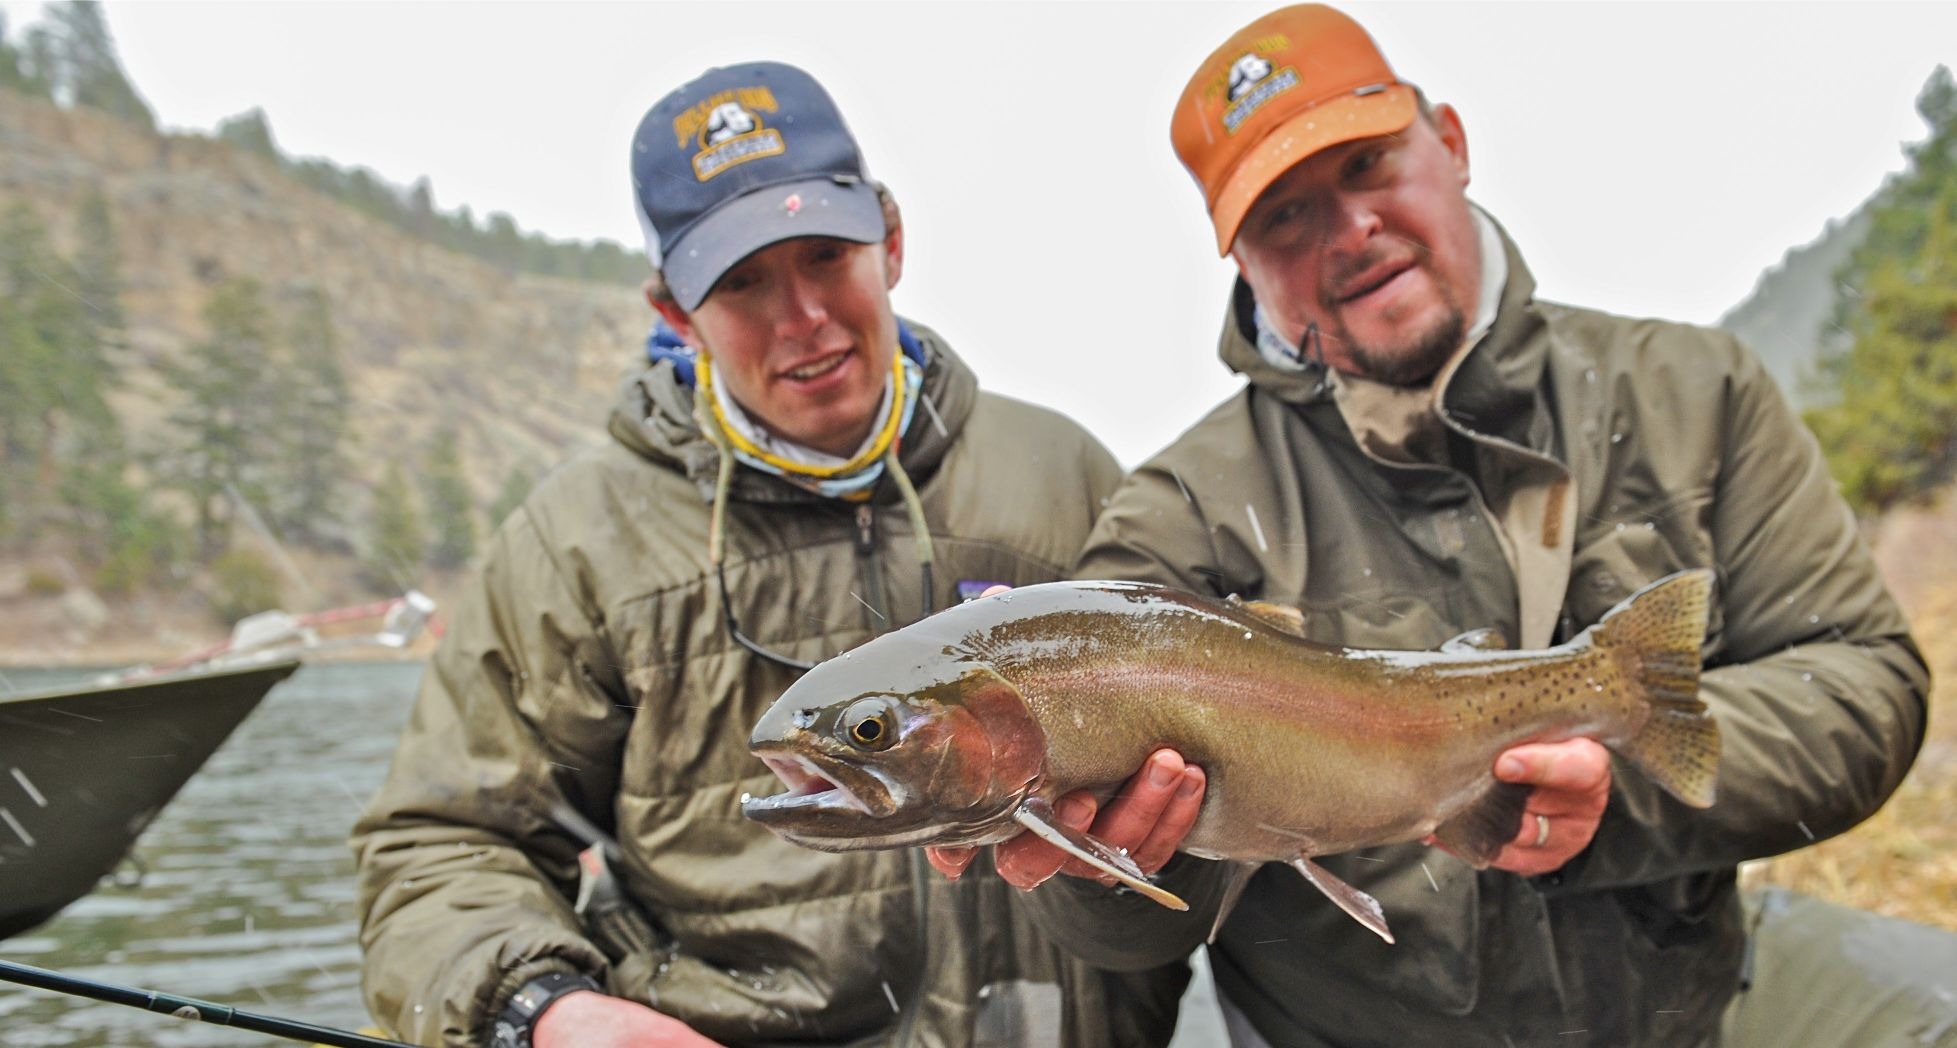 Missouri River Fly-Fishing - Channel & Brown Outfitting Co.